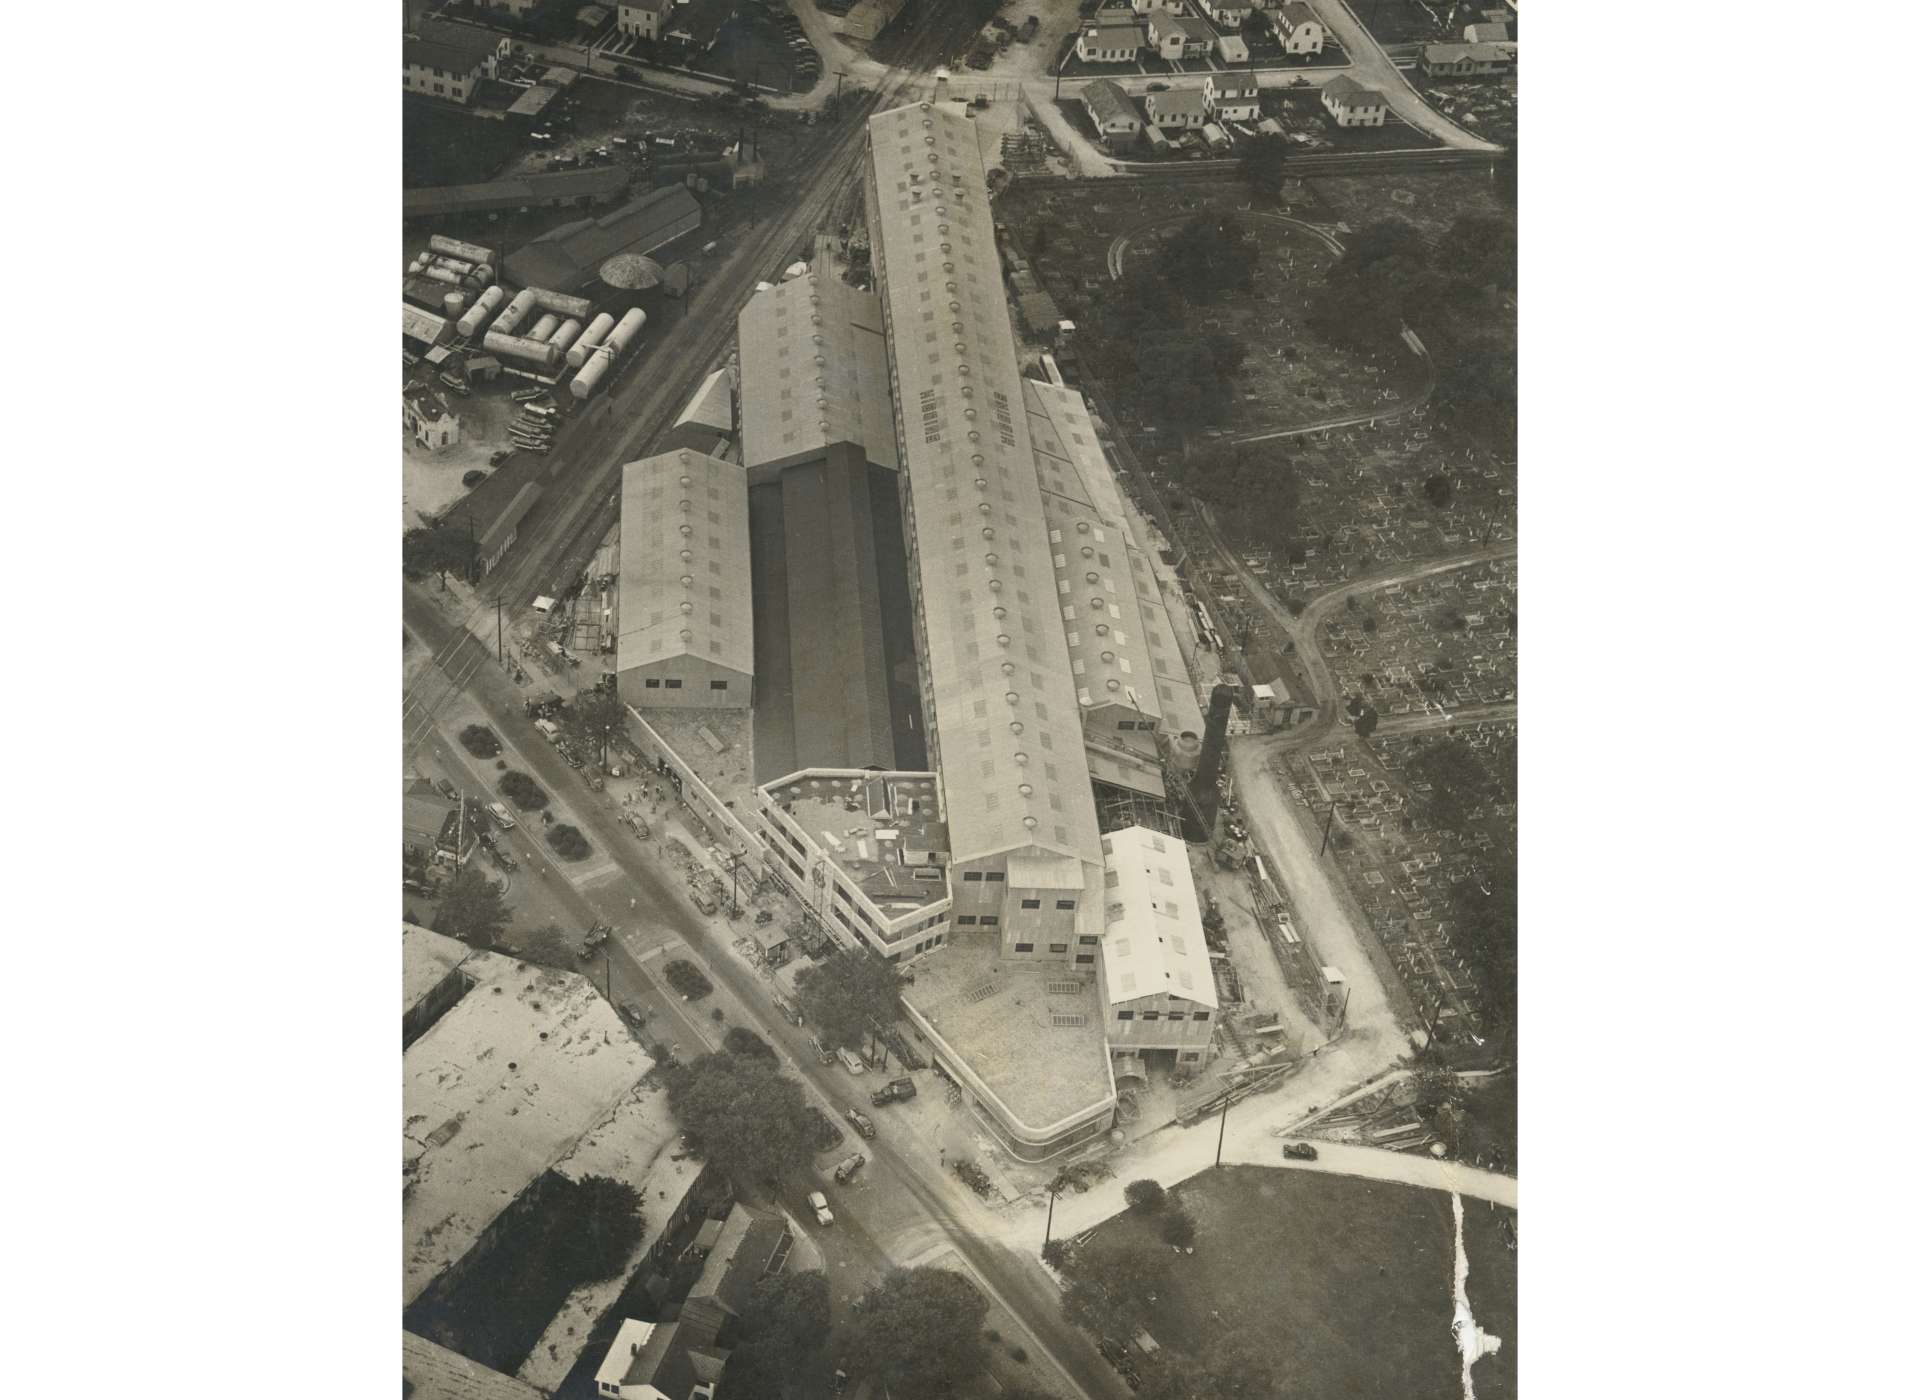 This May 1940 aerial photograph shows City Park Plant in the final stages of construction. When completed, City Park had one PT boat and two landing craft production lines. Higgins, without permission, built nearly 40 percent of the facility on property owned by Holt Cemetery. This property use was not resolved until after the end of World War II.